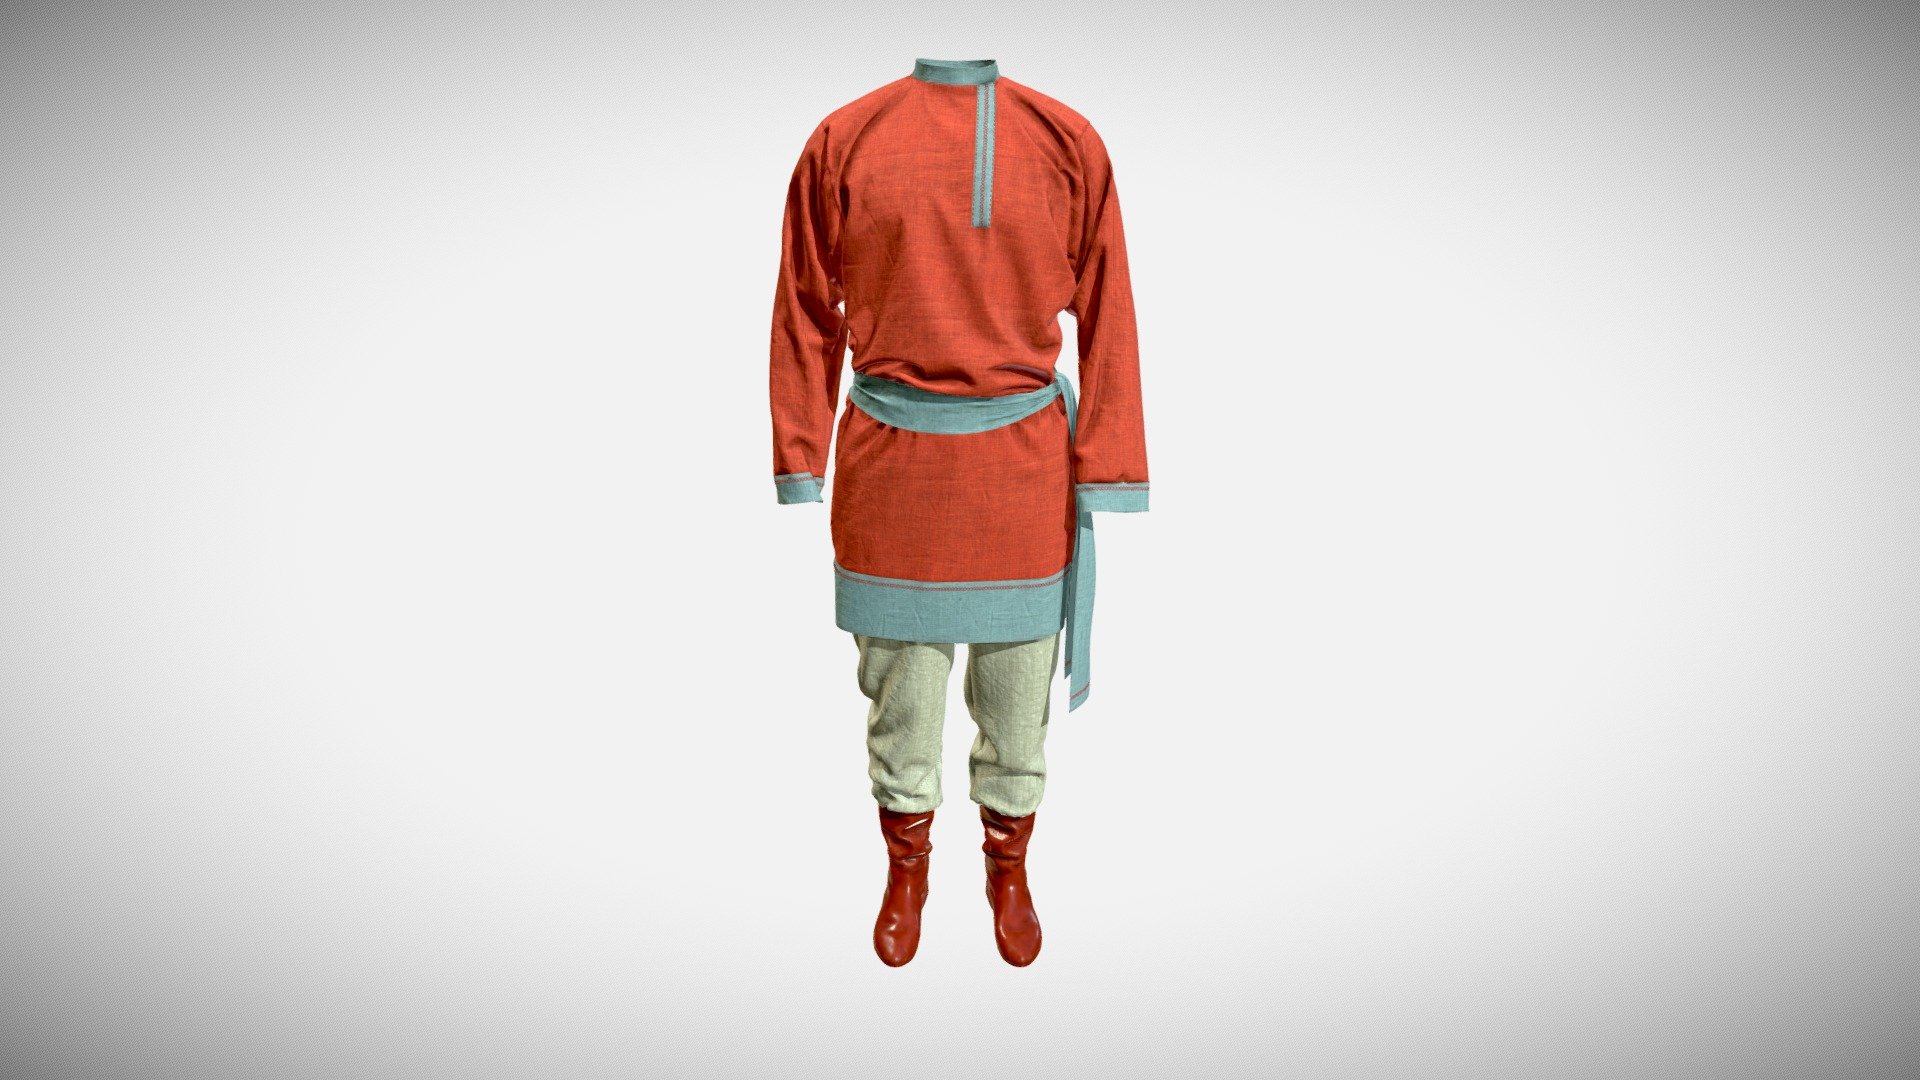 The 3D model presents a digital look of a historical costume from a Russian lubok print “Rayok” dating to the 18th century. The costume was made for a theatrical performance «Indecent is decent» (Ivanovo State Museum of Local History named after D.G. Burylin, October 30, 2019 – March 1, 2020, http://xn&ndash;80ablhhepdp1a2ae9h.xn&ndash;p1ai/). The 3D reconstruction was made by using historical block patterns, 2D scans of textile materials and 3d scans of contemporary actors. Anthroscan, Clo3D, SubstancePainter and Unreal Engine 4 software programs were applied. The authors of the 3D model are 

Aleksei Moskvin https://independent.academia.edu/AlekseiMoskvin

Mariia Moskvina https://independent.academia.edu/MariiaMoskvina

(Saint Petersburg State University of Industrial Technologies and Design)

and

Victor Kuzmichev https://independent.academia.edu/VictorKuzmichev

(Ivanovo State Polytechnic University)

See more at https://www.youtube.com/watch?v=PD39yeQZs-I - Raek’s costume from a traditional engraving - Download Free 3D model by Aleksei Moskvin (@alekseimoskvin1) 3d model